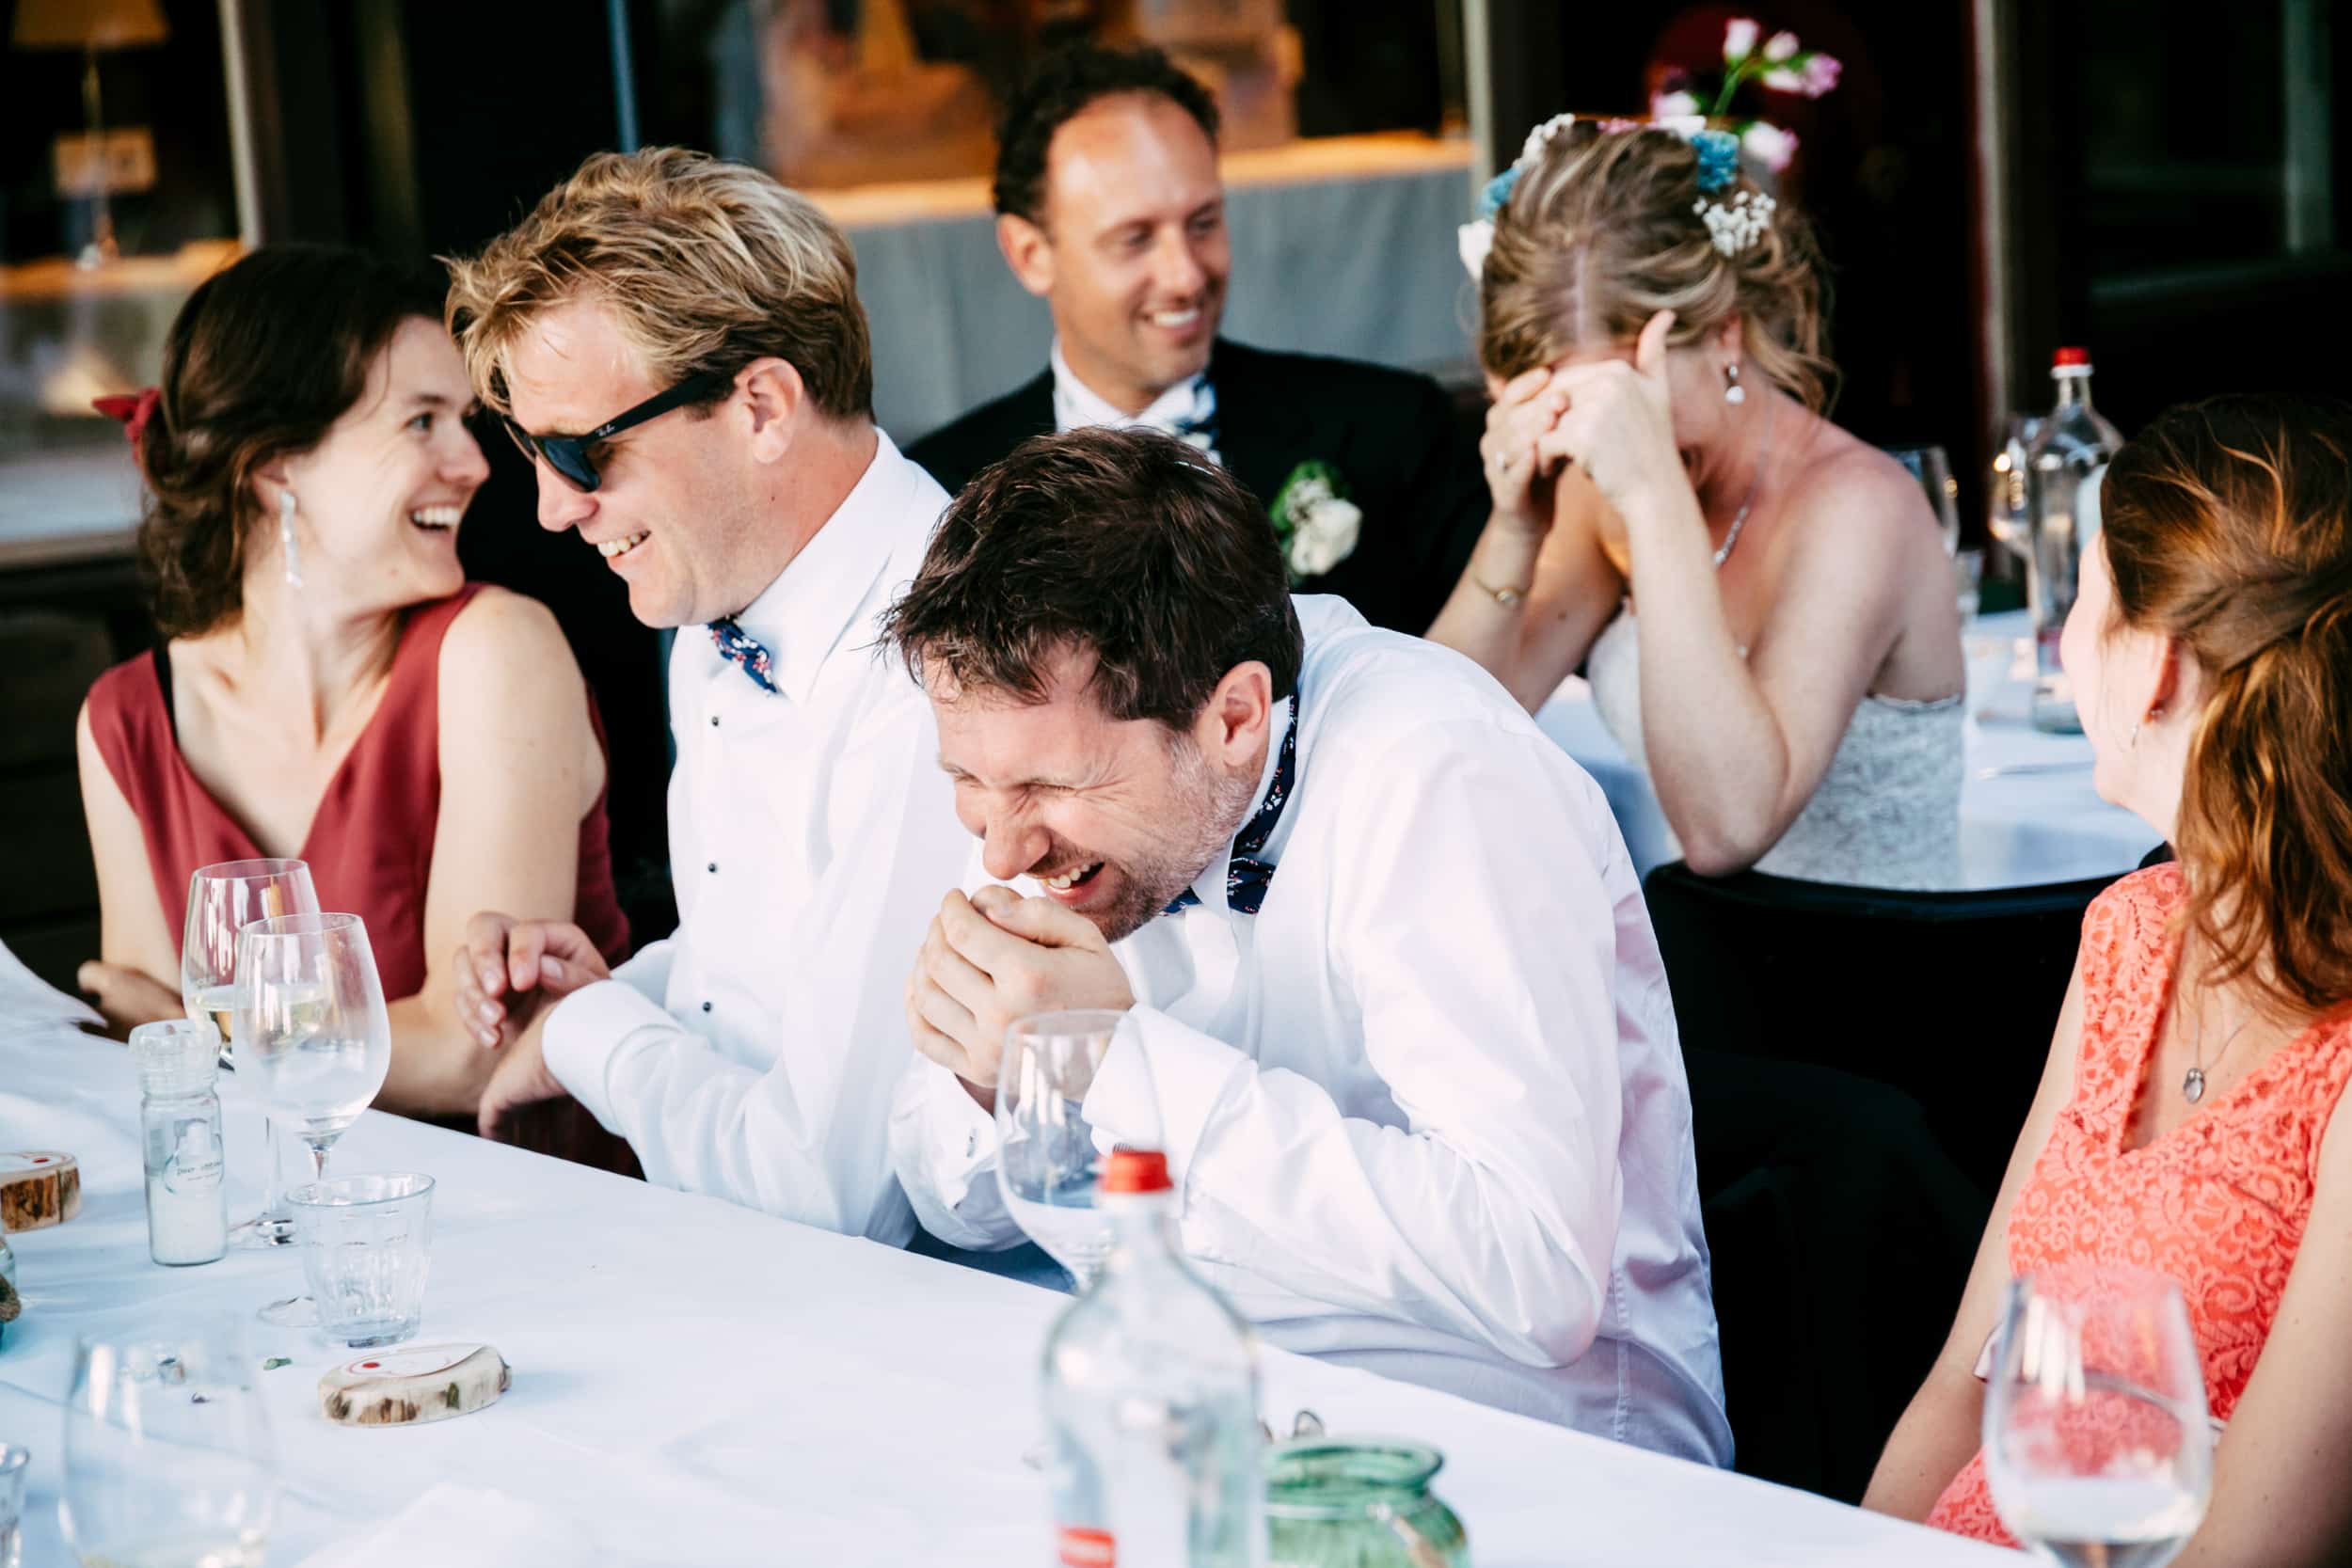 A group of people laughing and enjoying a Lacy speech at a wedding table.